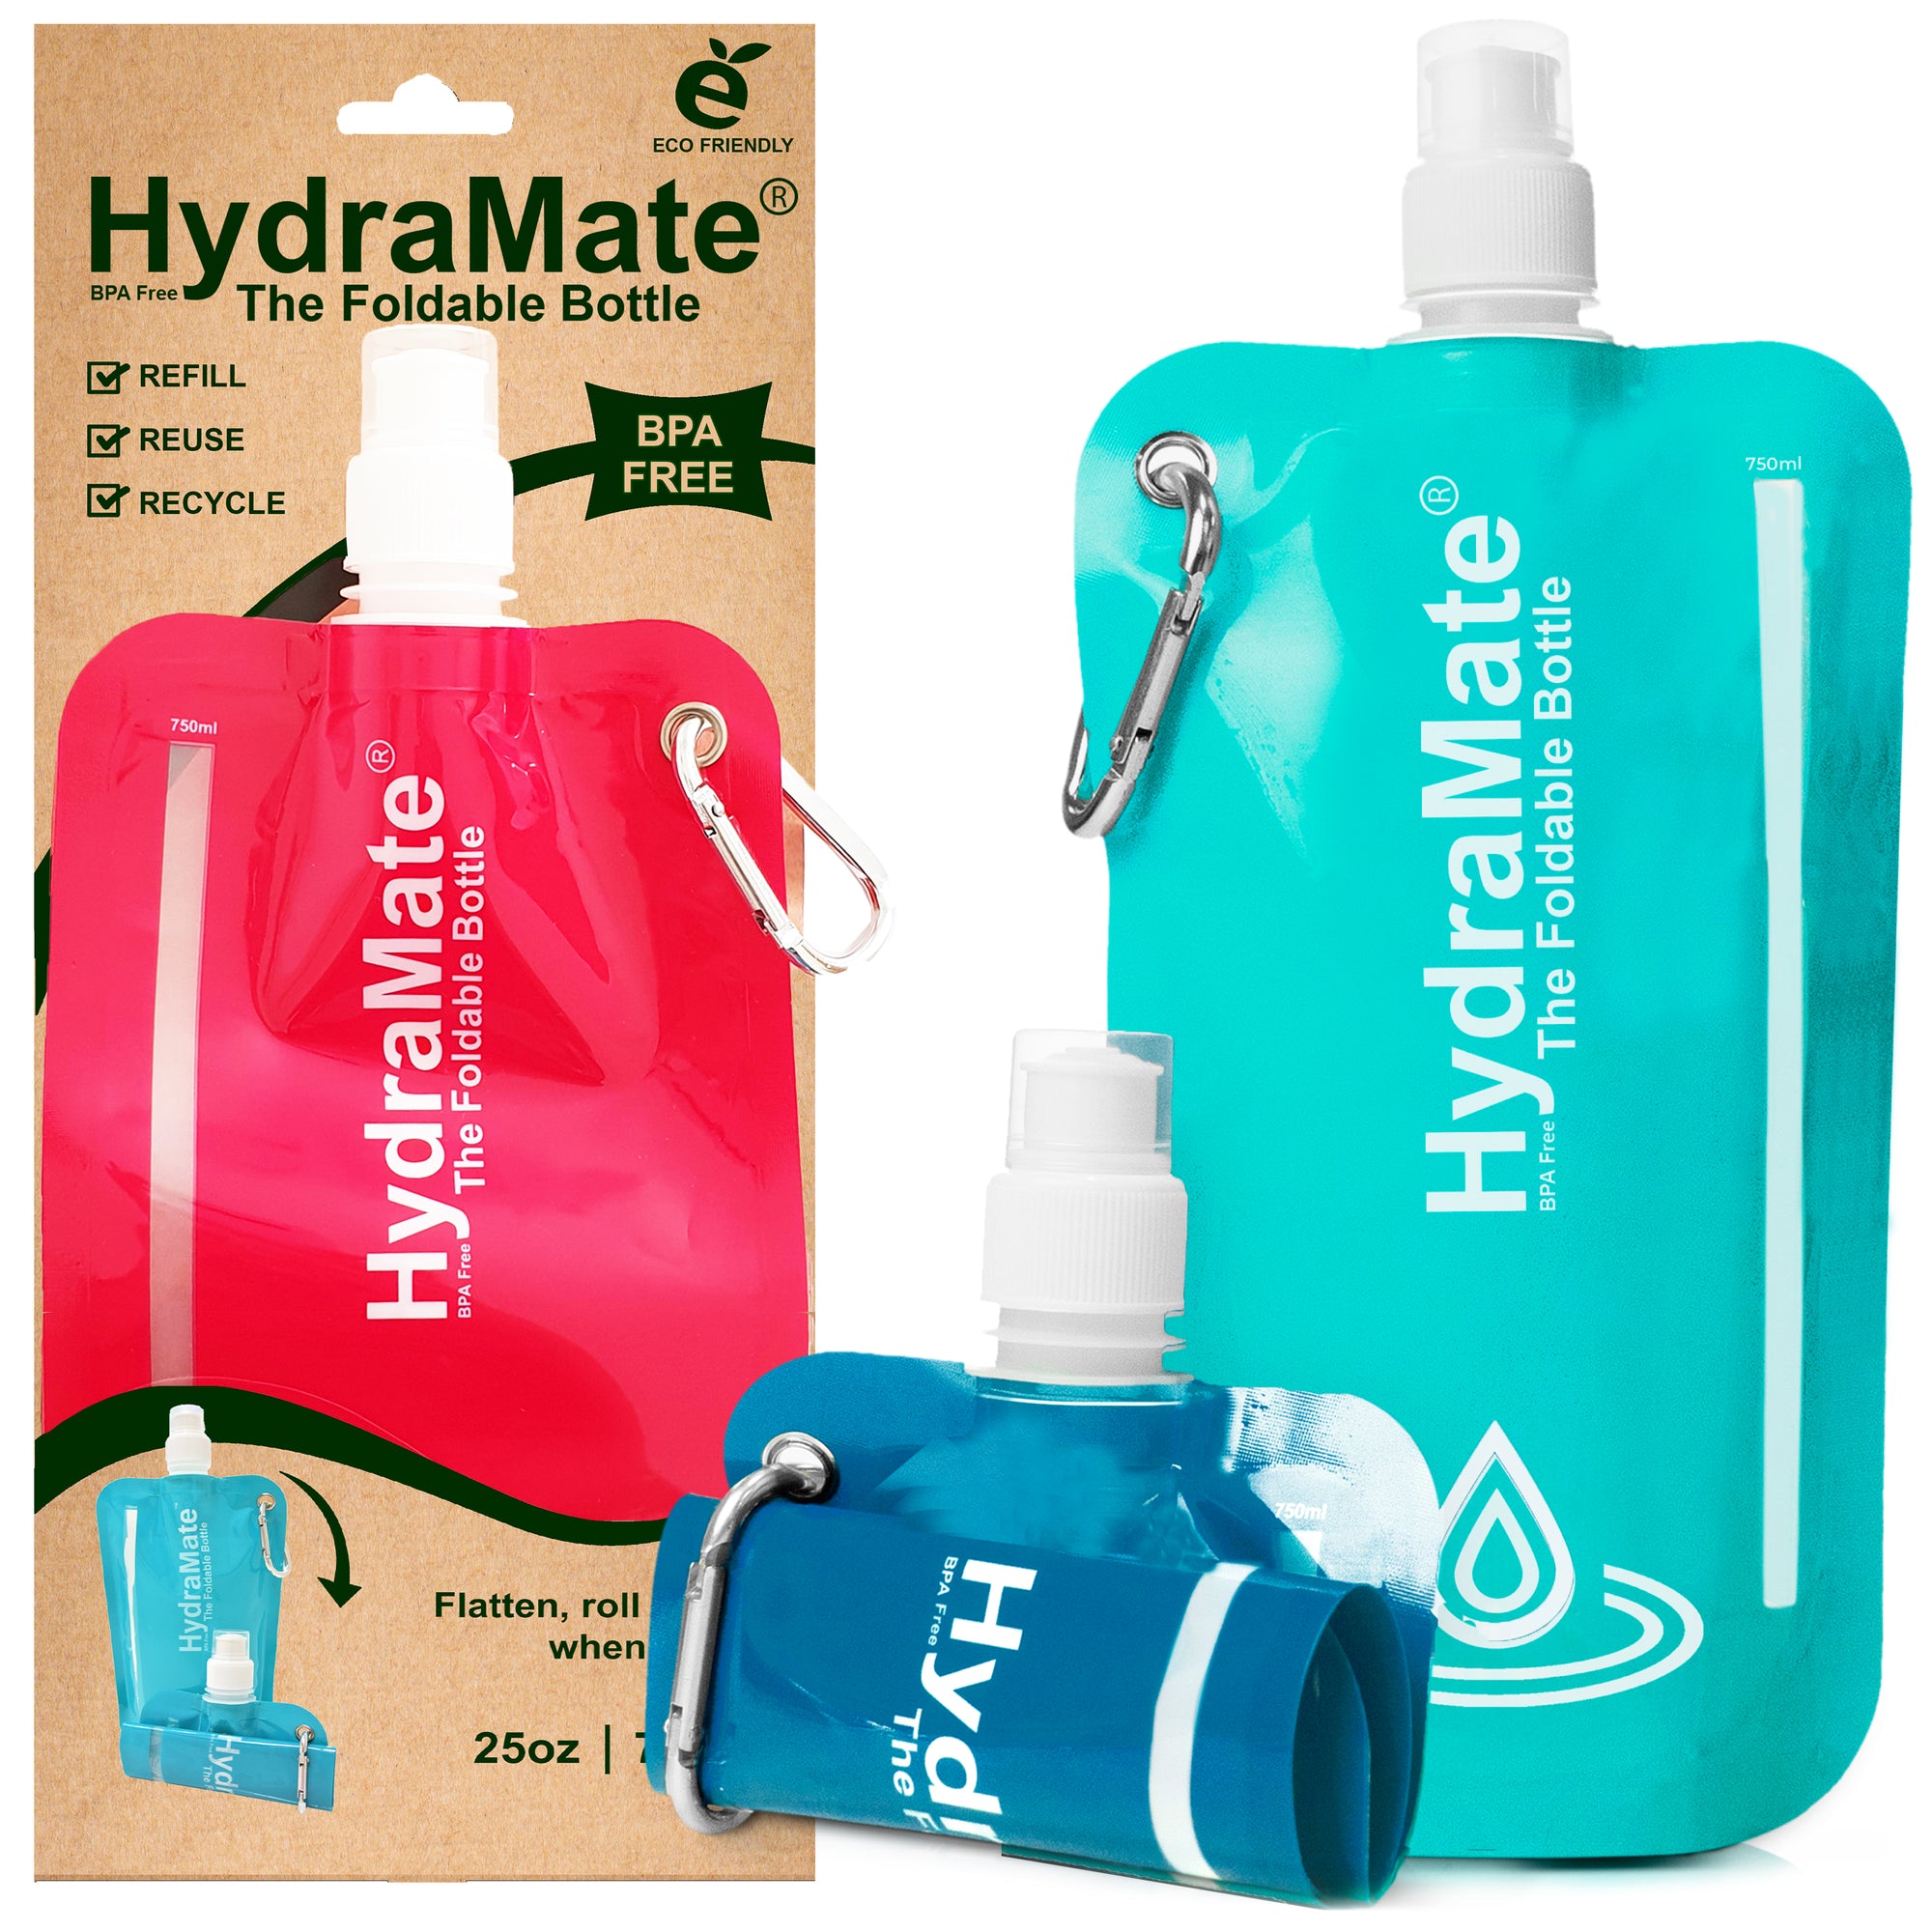 Collapsible water bottle for travel and festivals